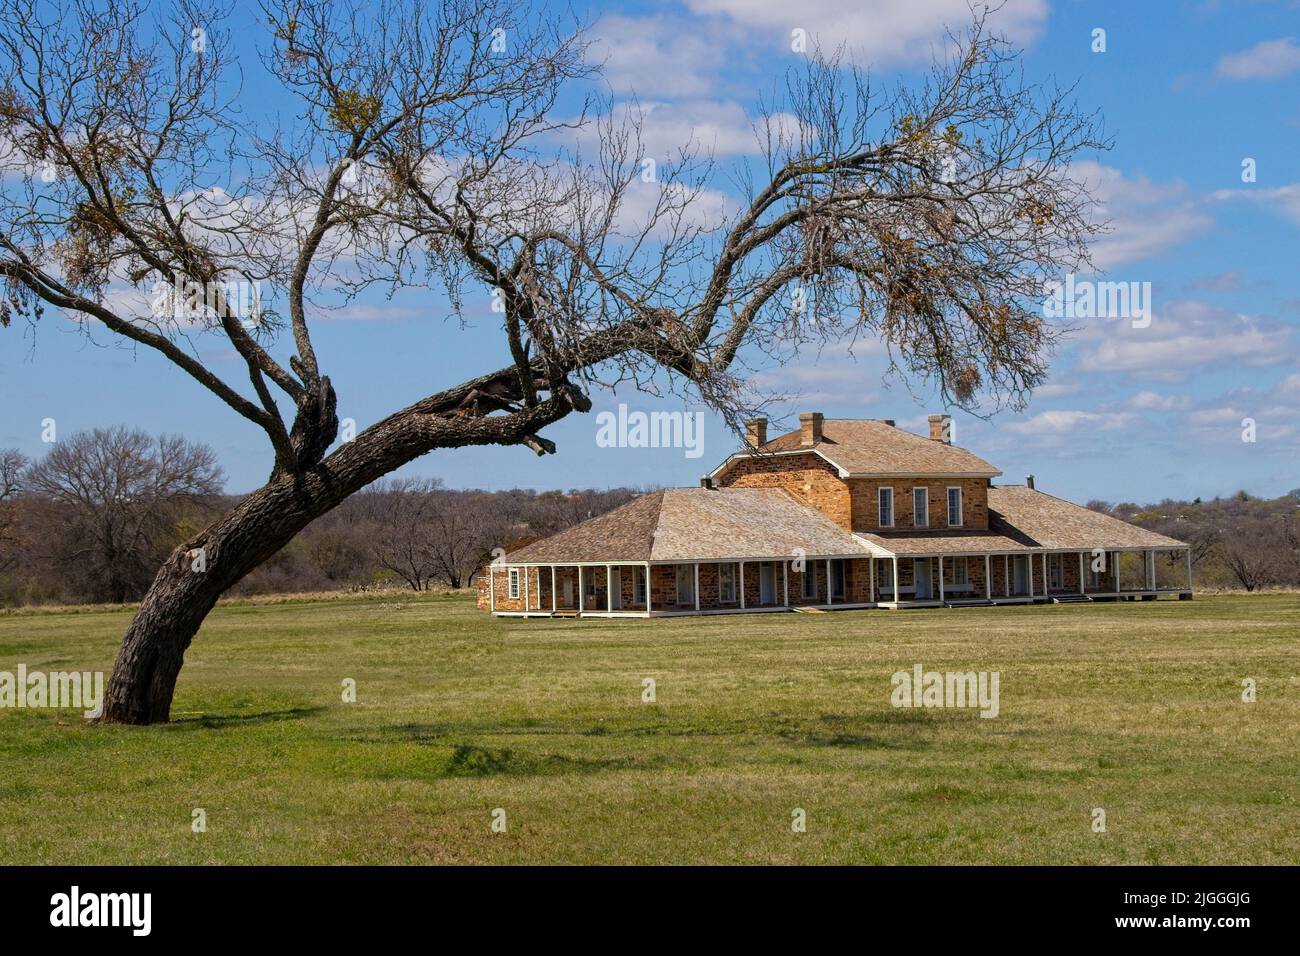 Fort Richardson, is near Jacksboro, Texas. Established in 1862, a survivor of over 150 years of history is the sandstone post hospital. Stock Photo